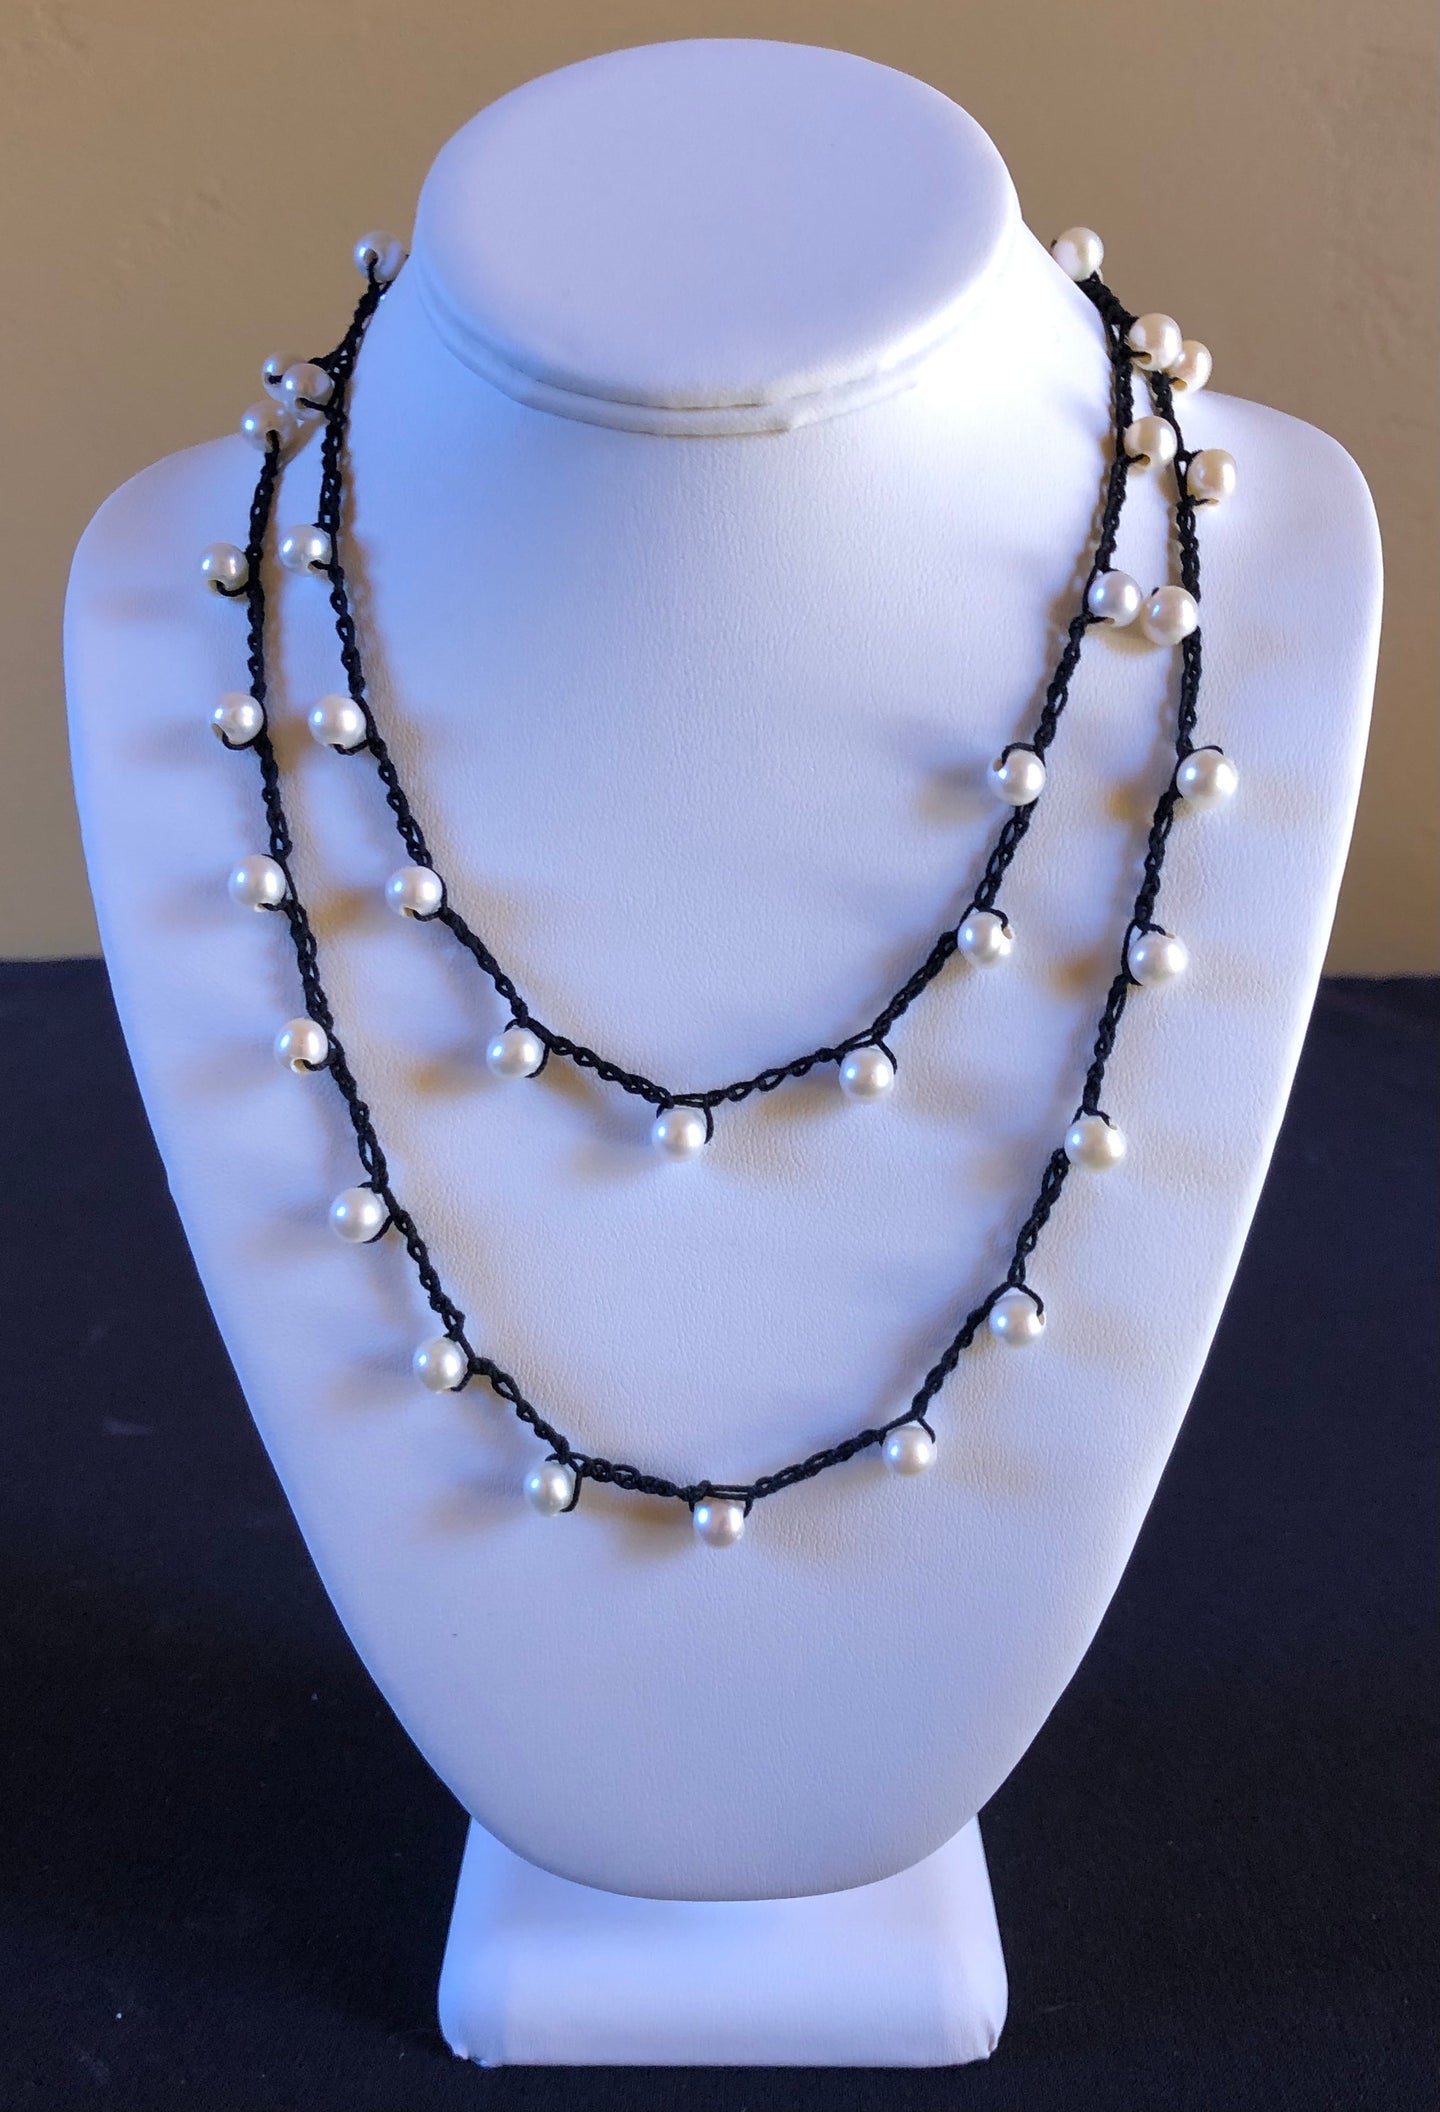 Necklace - Black Crocheted w/ Pearls